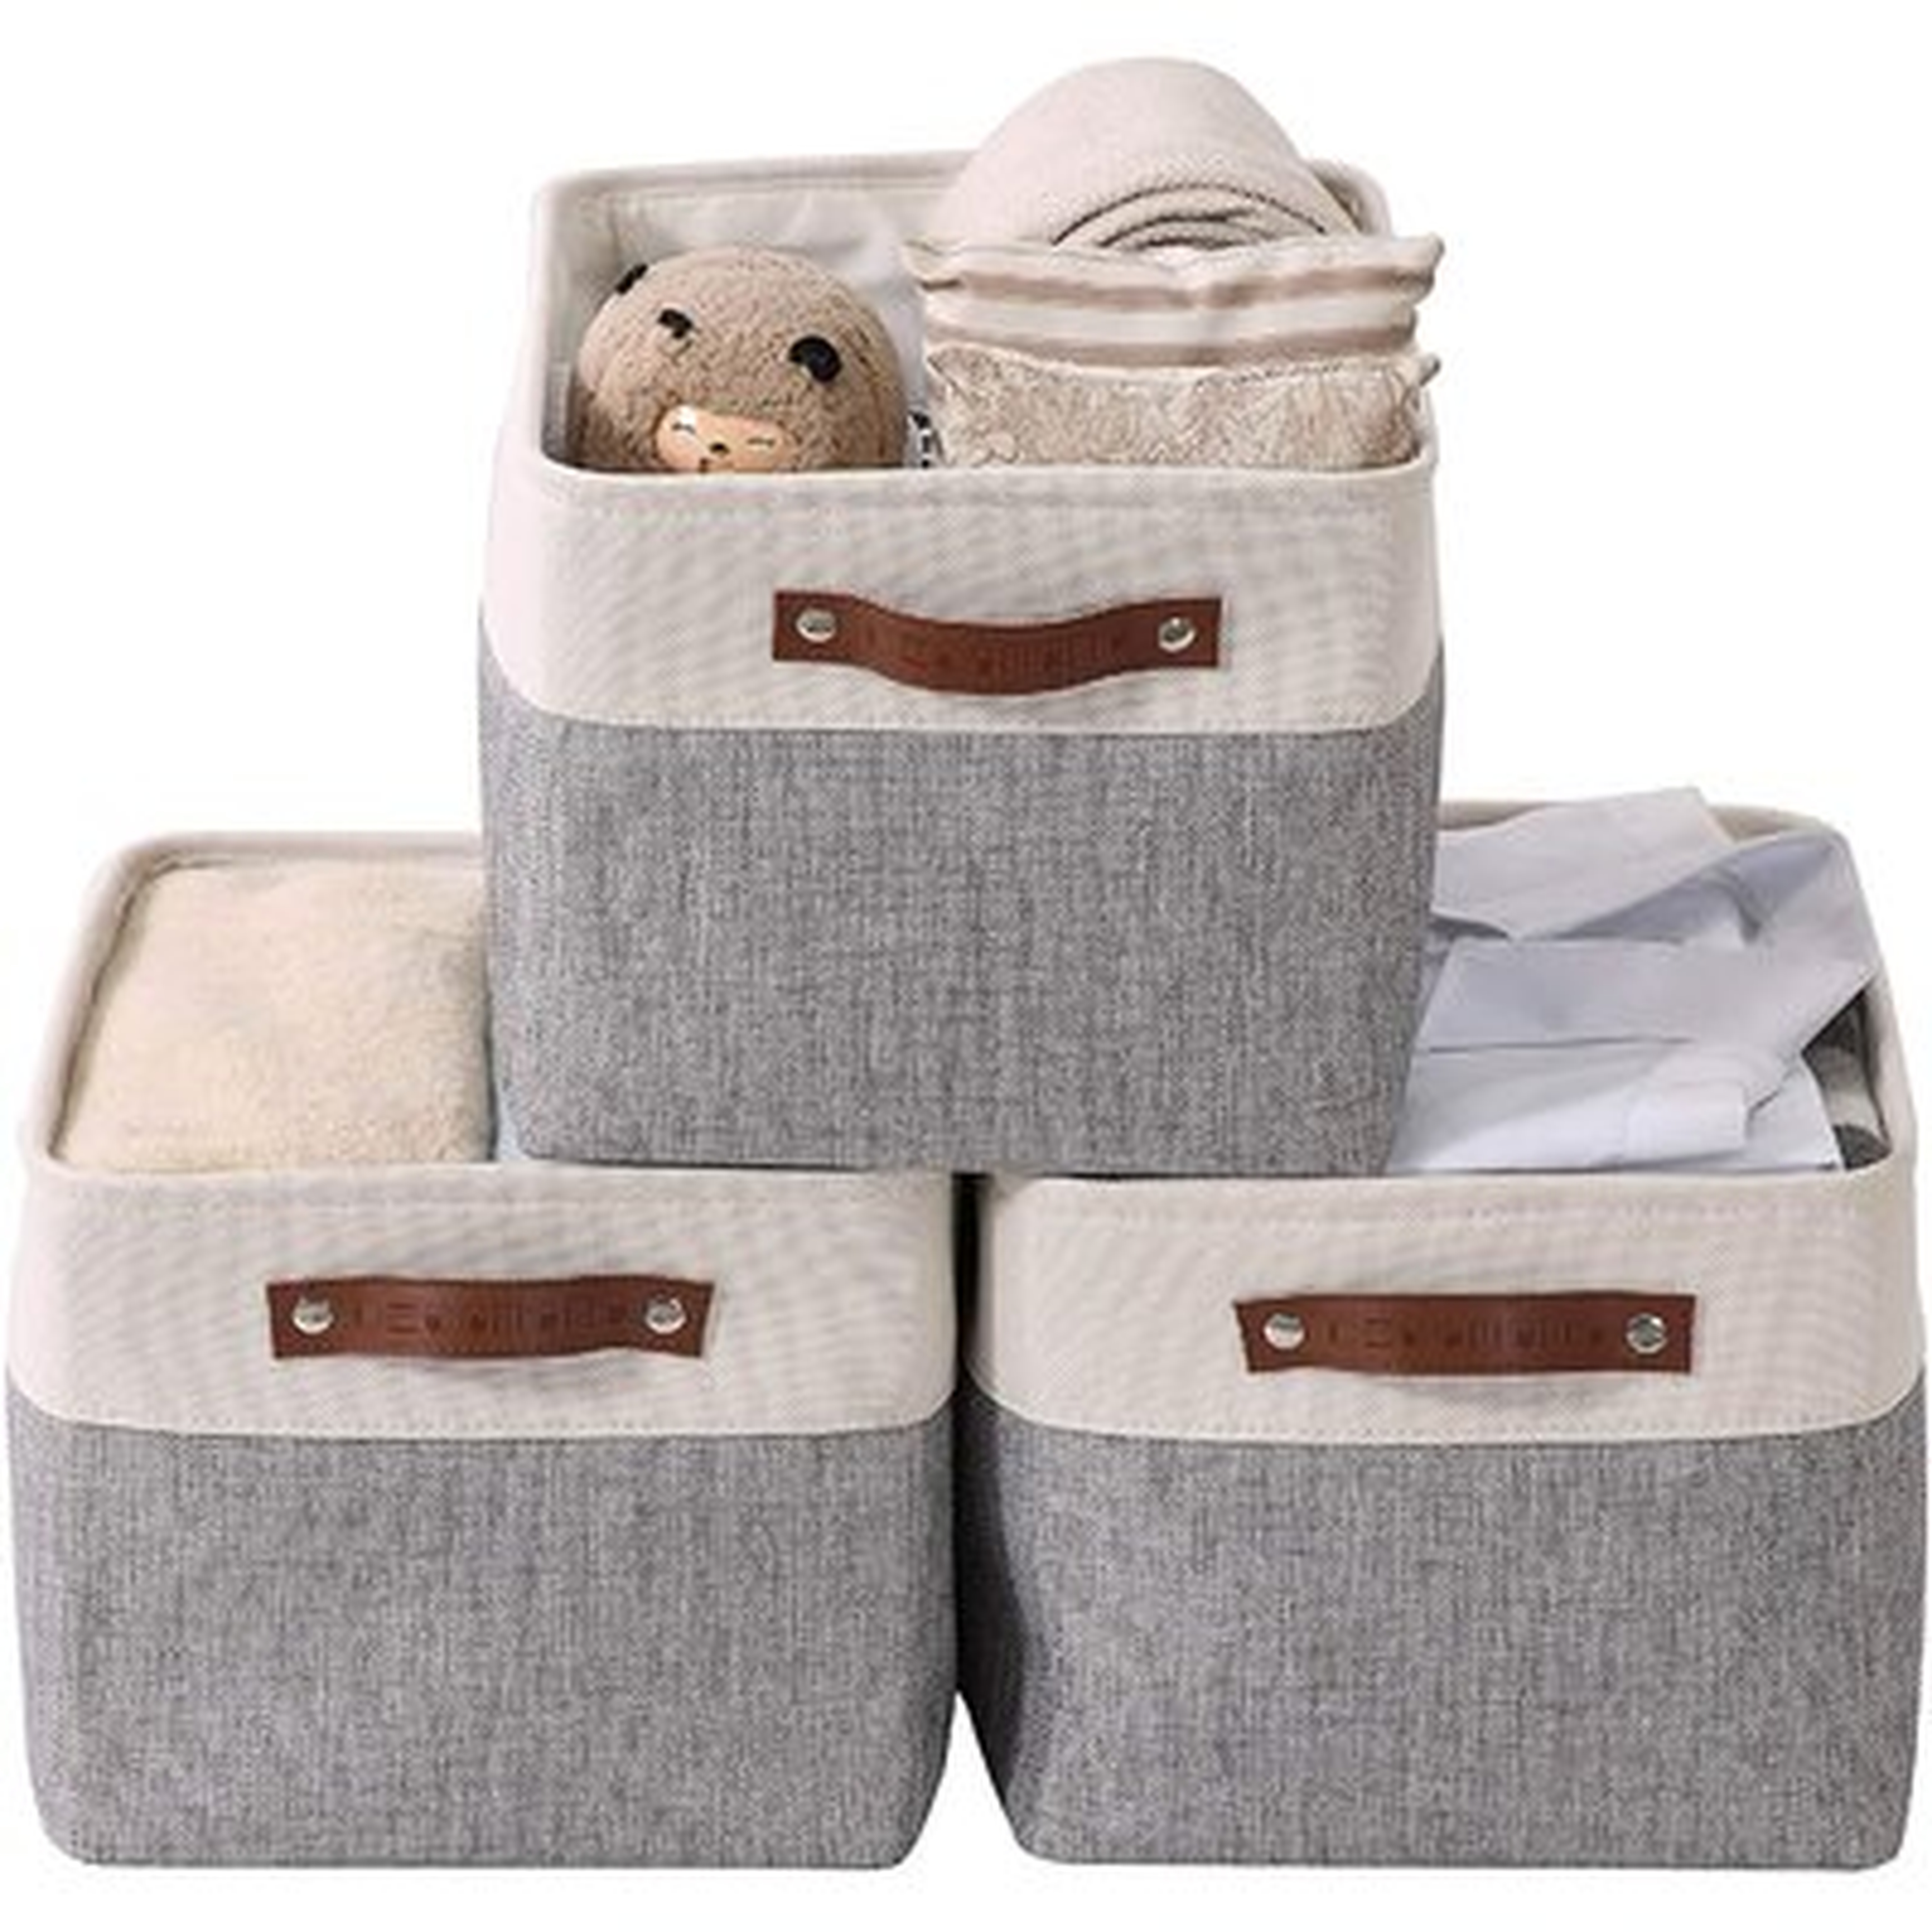 Foldable Storage Bin | Collapsible Sturdy Cationic Fabric Storage Basket Cube W/Handles For Organizing Shelf Nursery Home Closet (Grey And White, Large - 15 X 11 X 9.5" - 3 Pack) - Wayfair